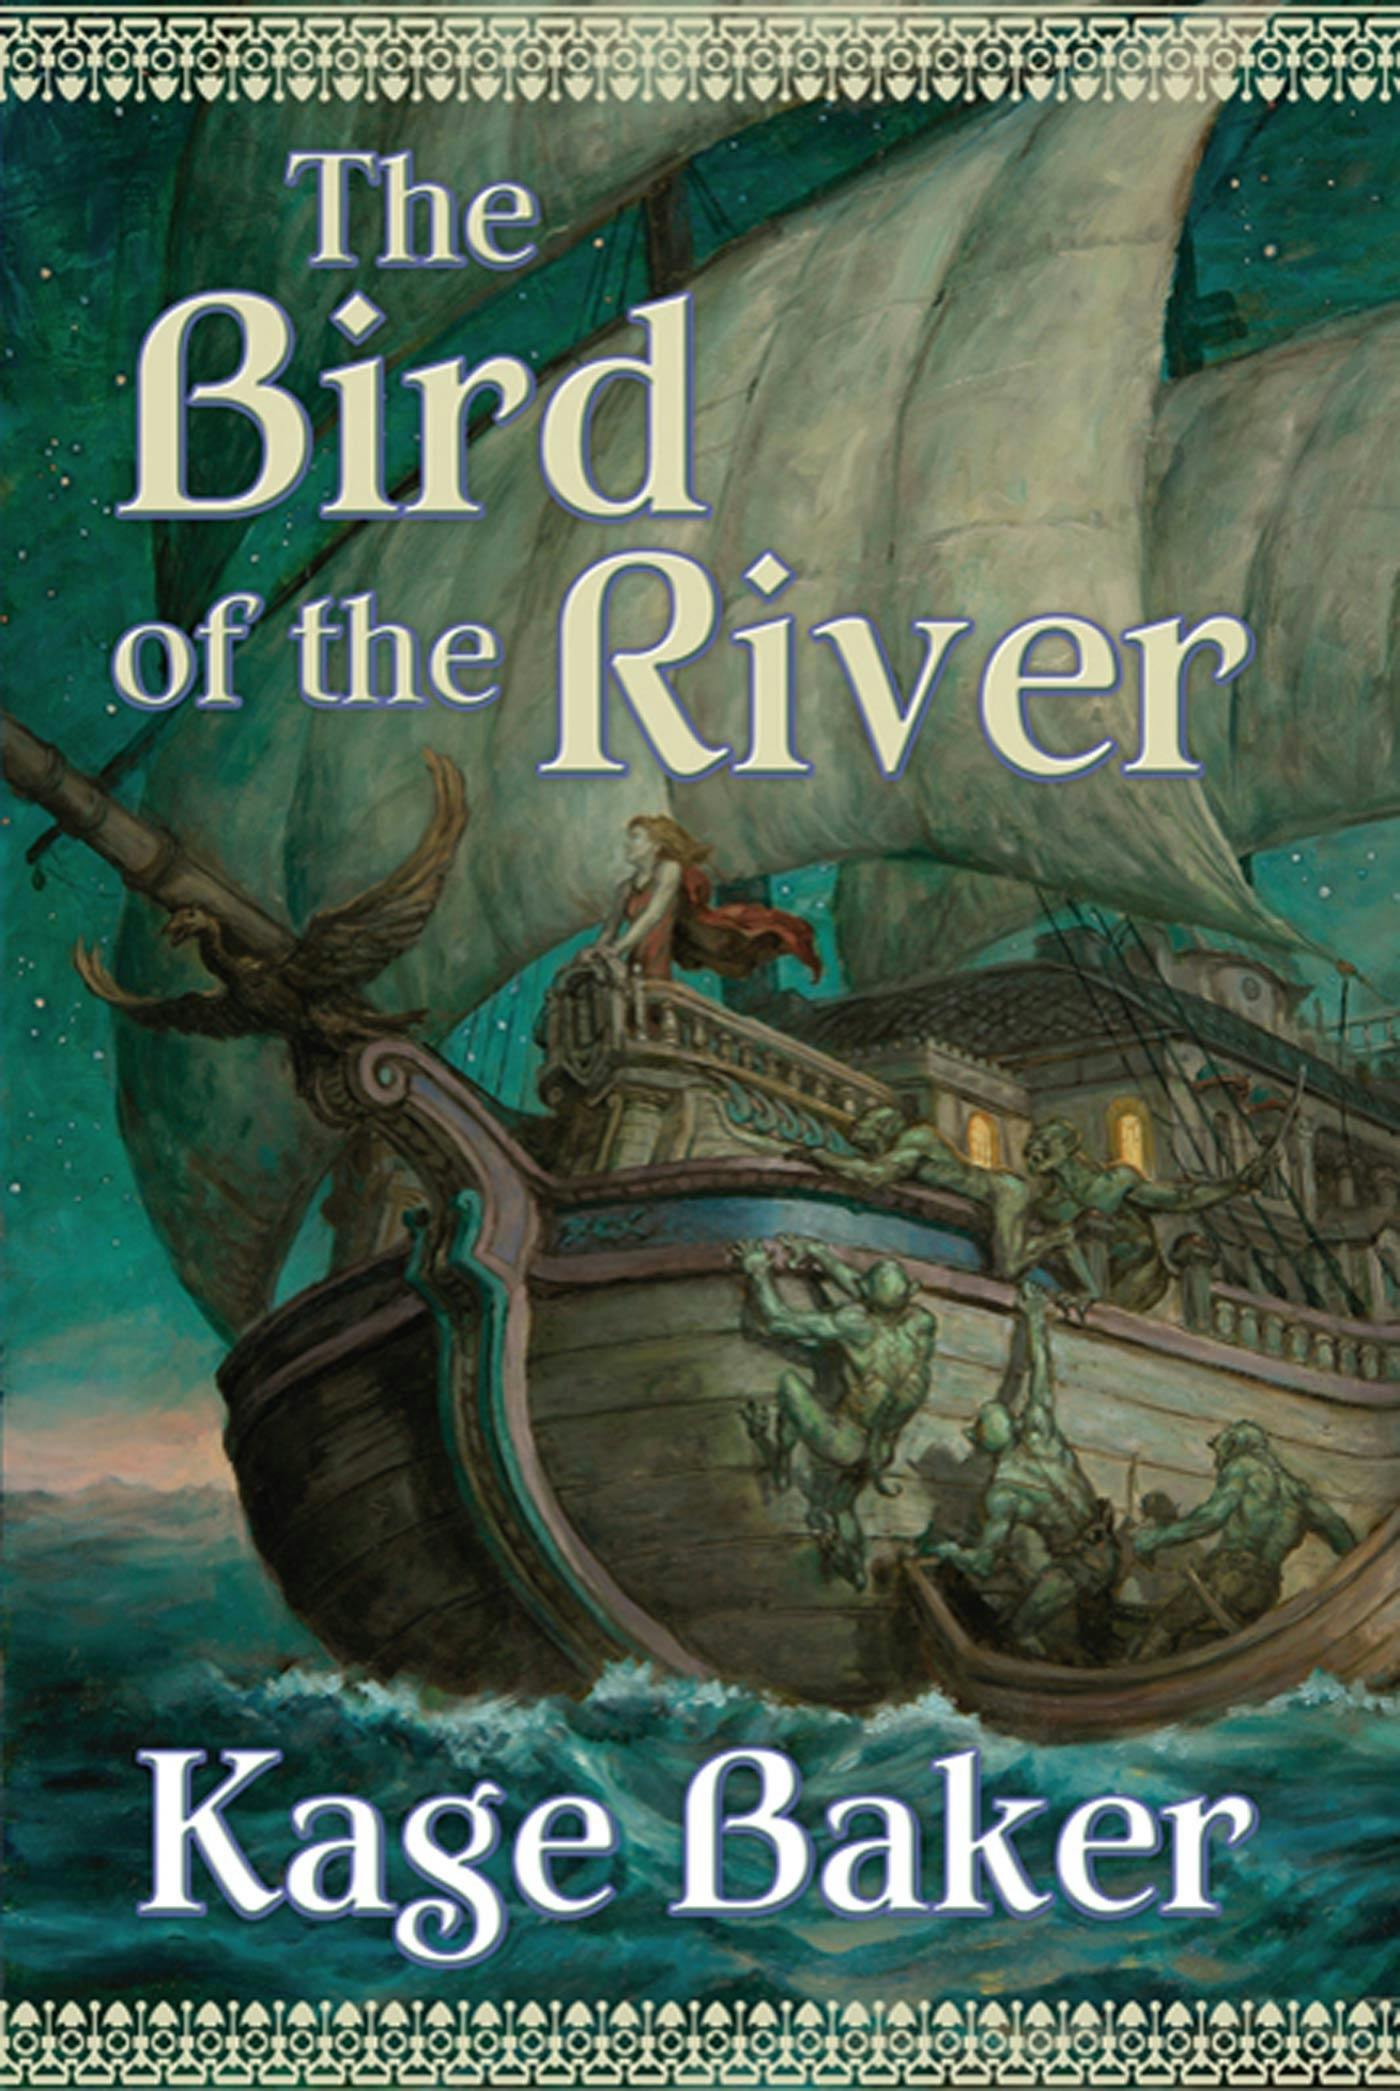 Cover for the book titled as: The Bird of the River